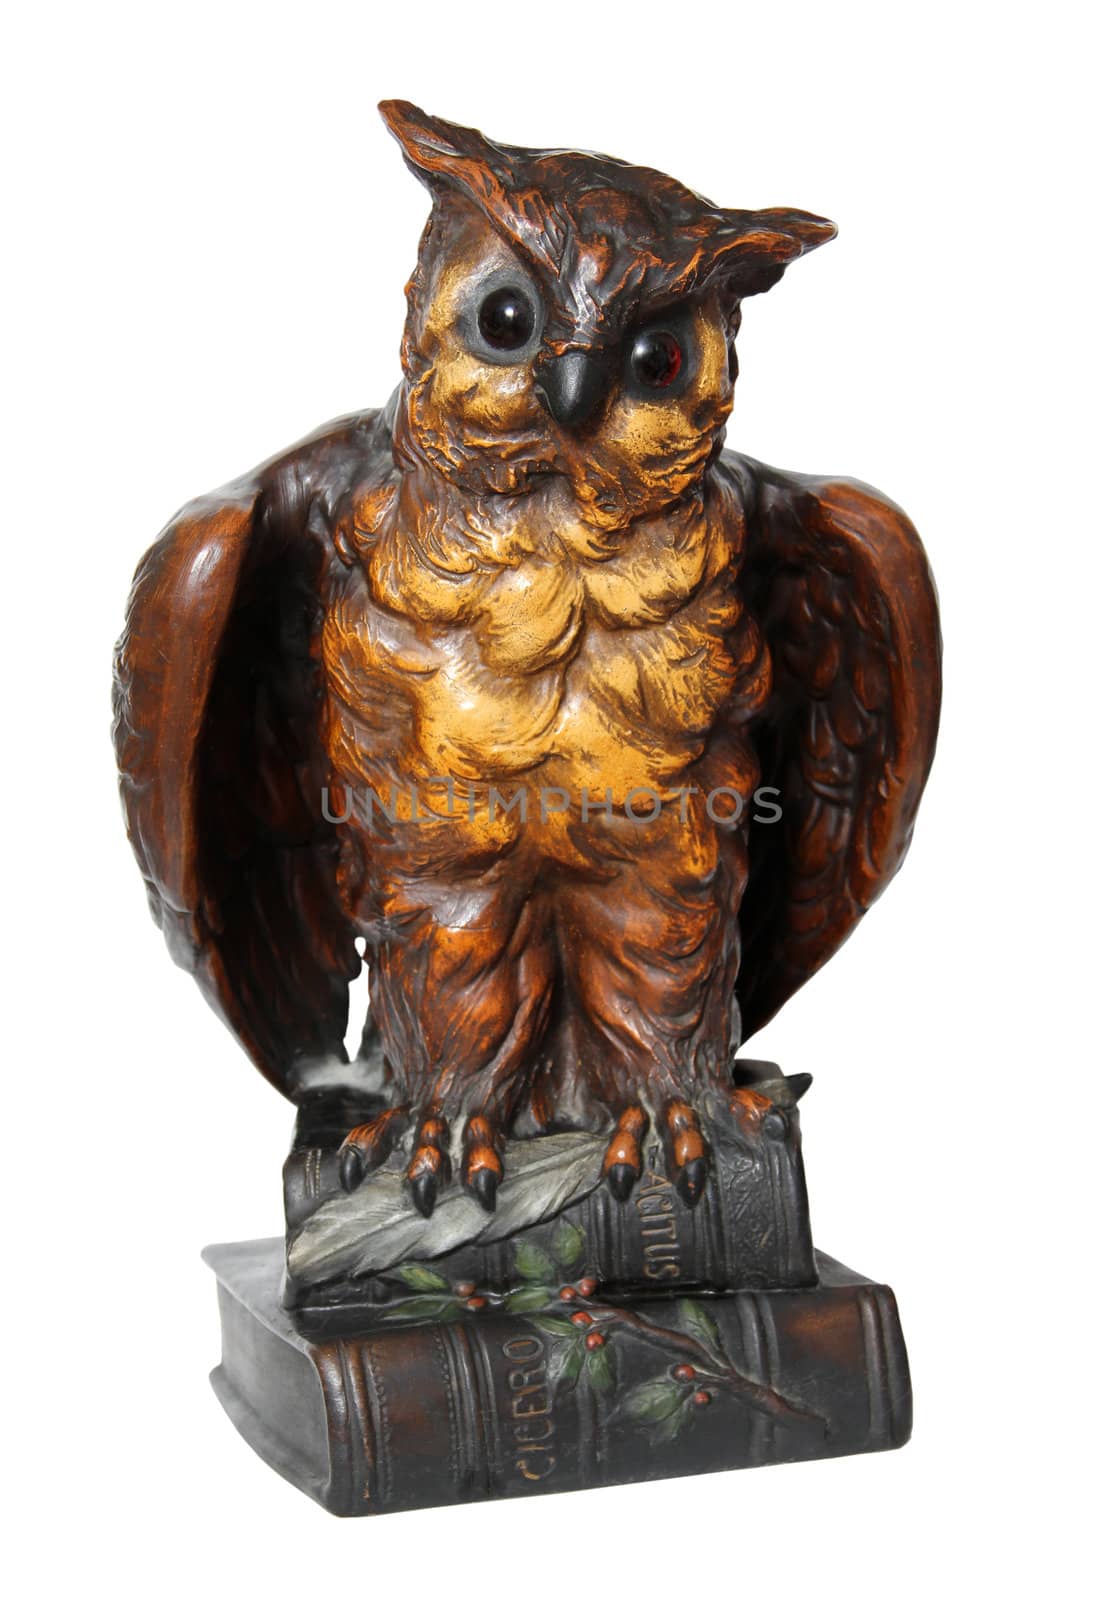 Owl statue symbolizing the learning with books.